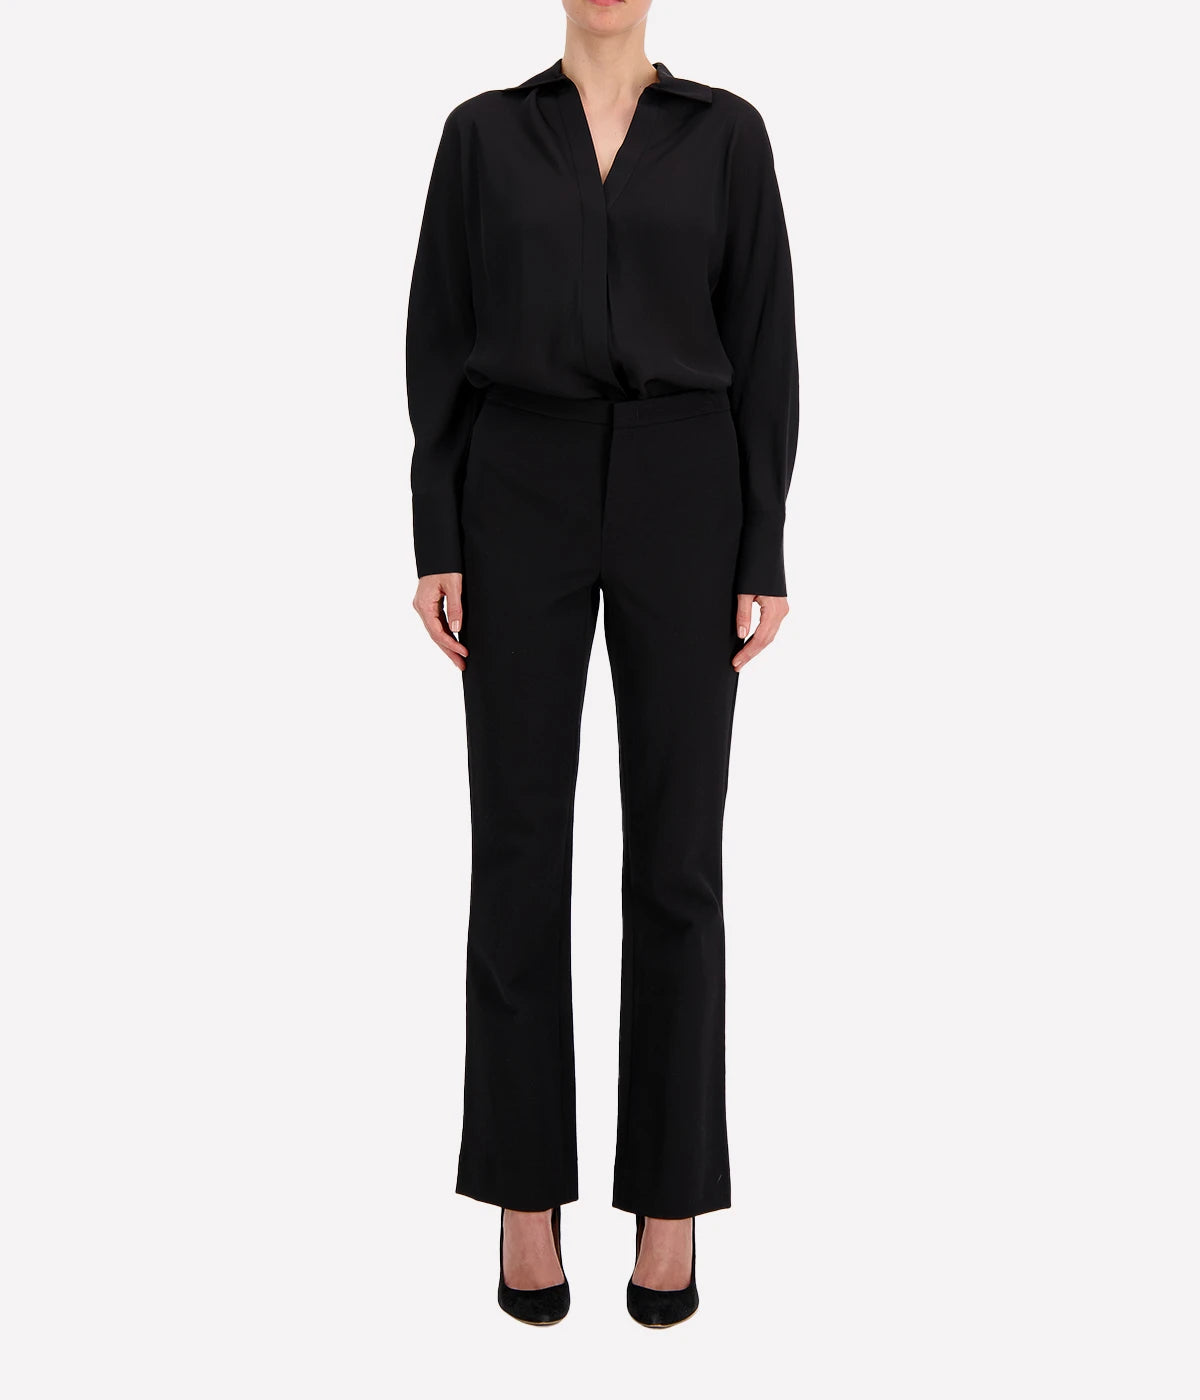 Straight black vince pants with a subtle flare at the hem, perfect for corporate wear with heels.